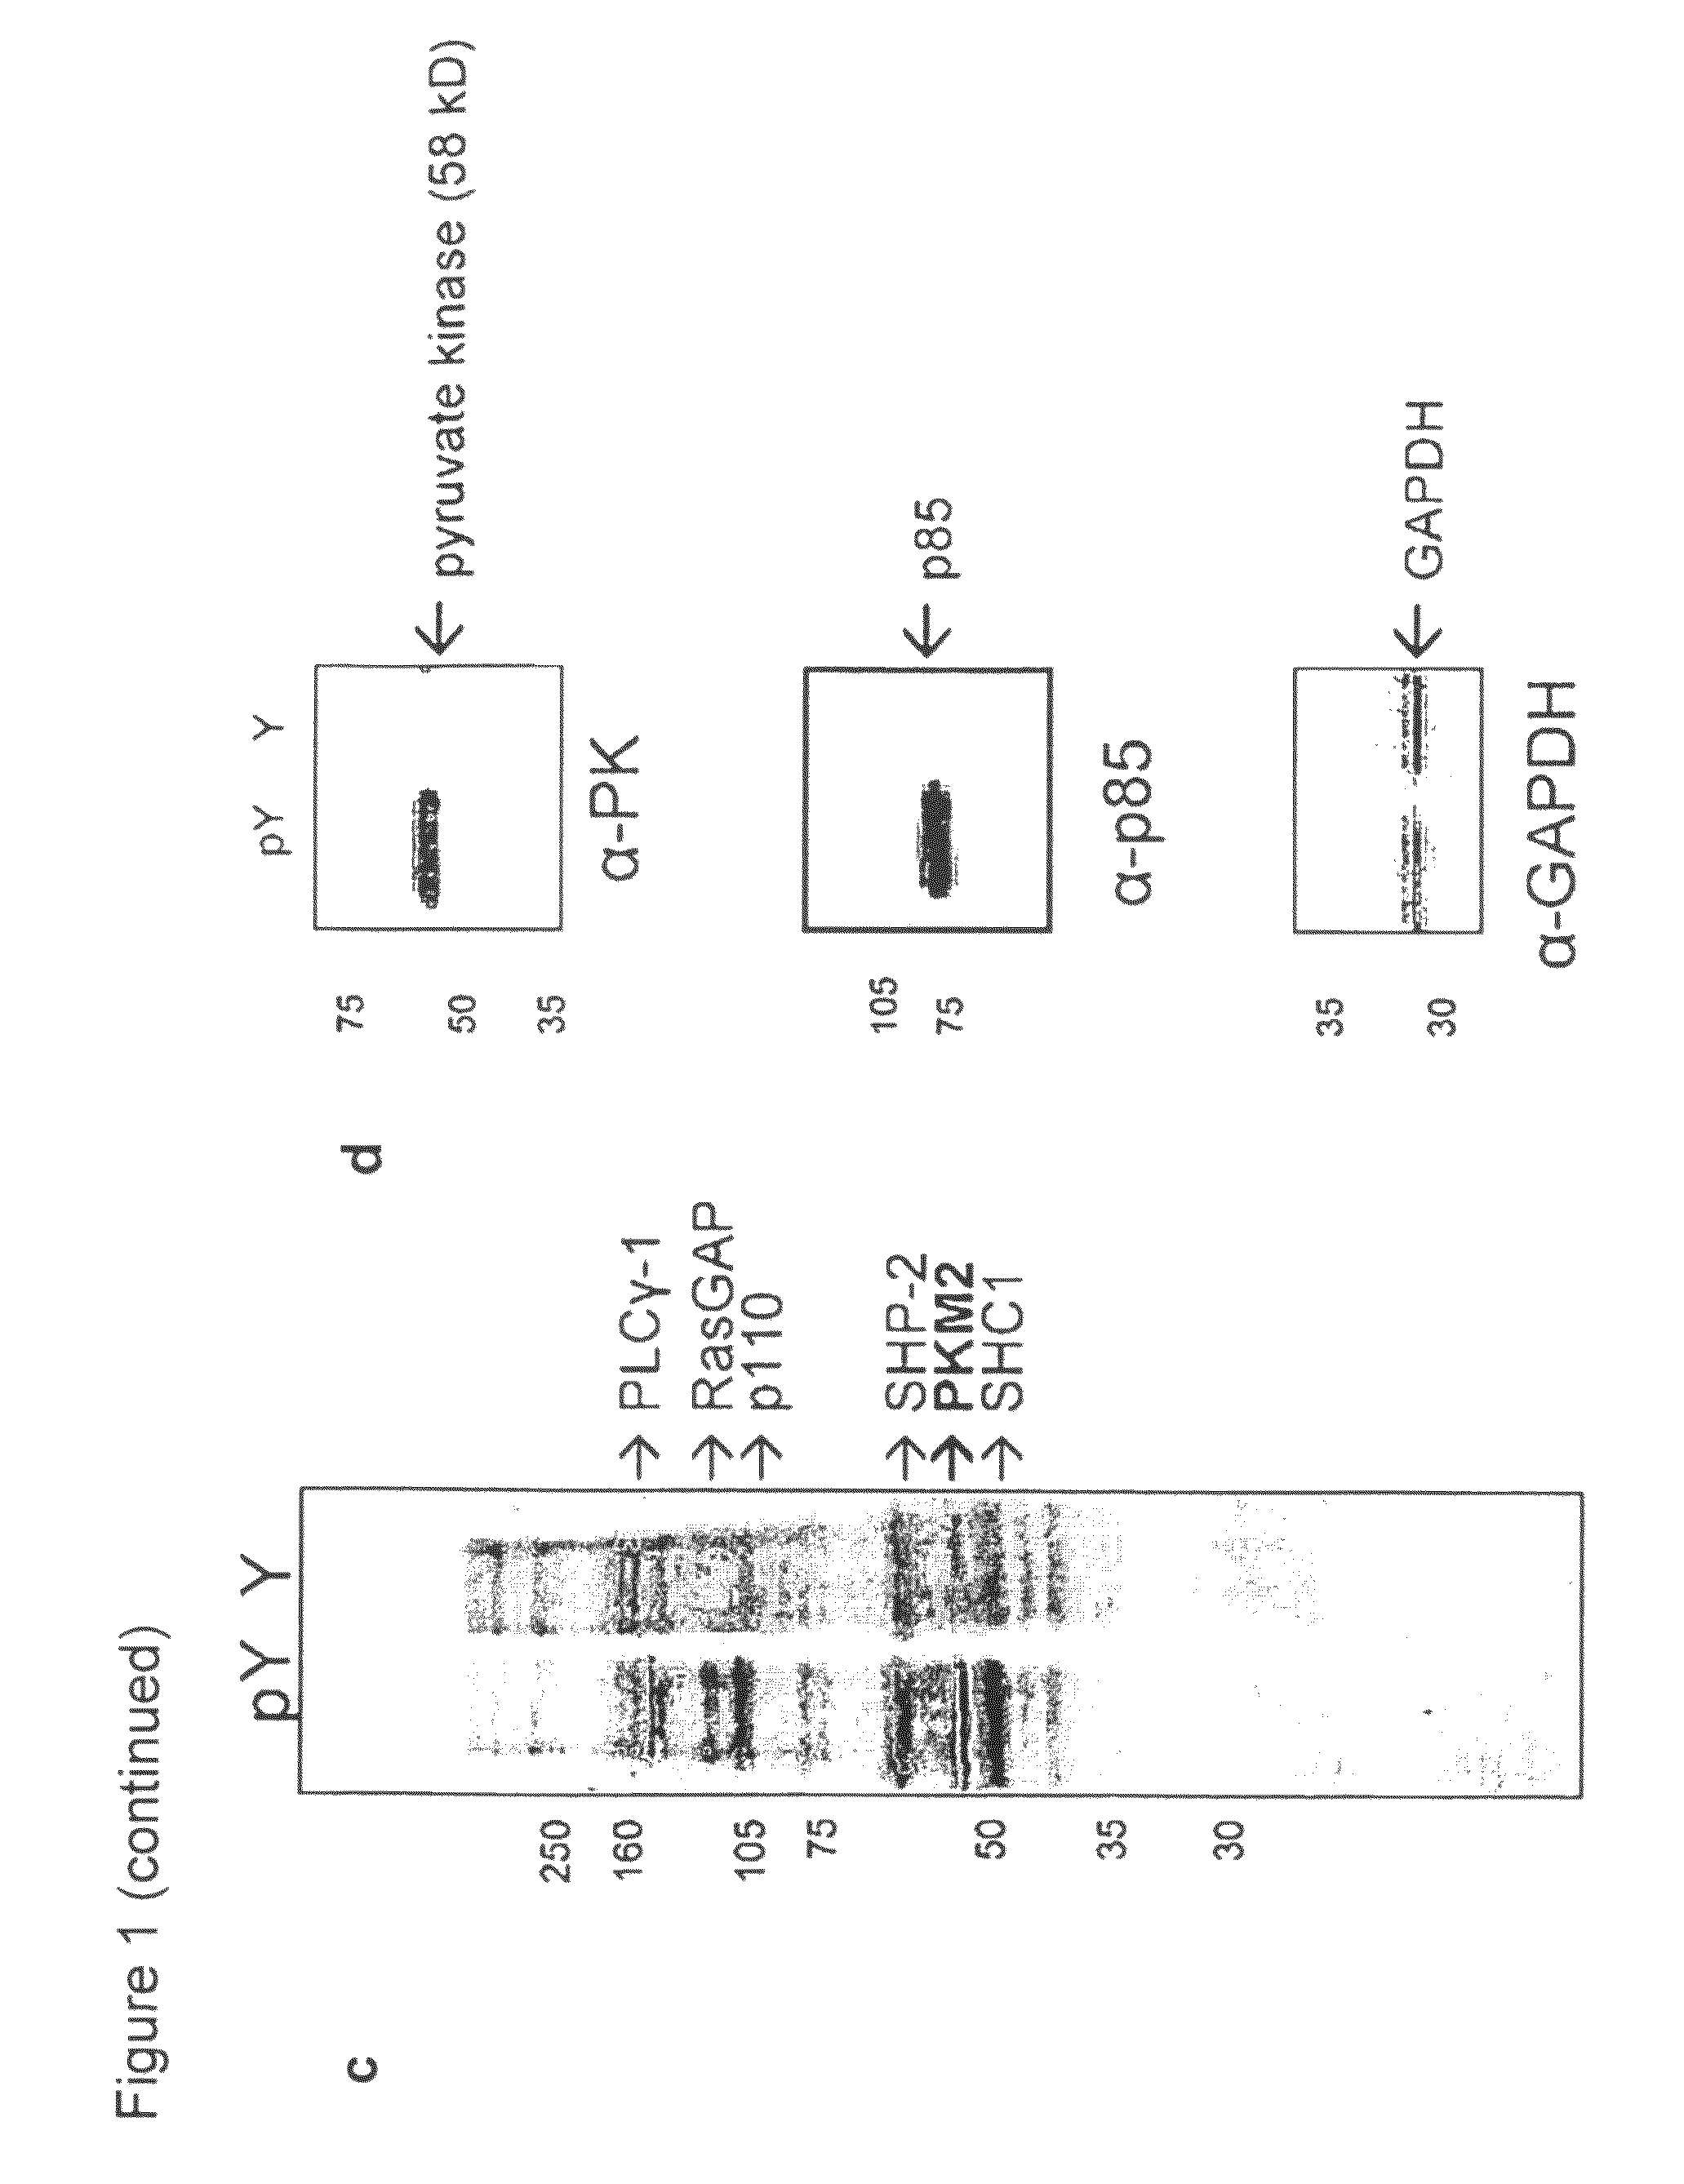 Activators of pyruvate kinase M2 and methods of treating disease